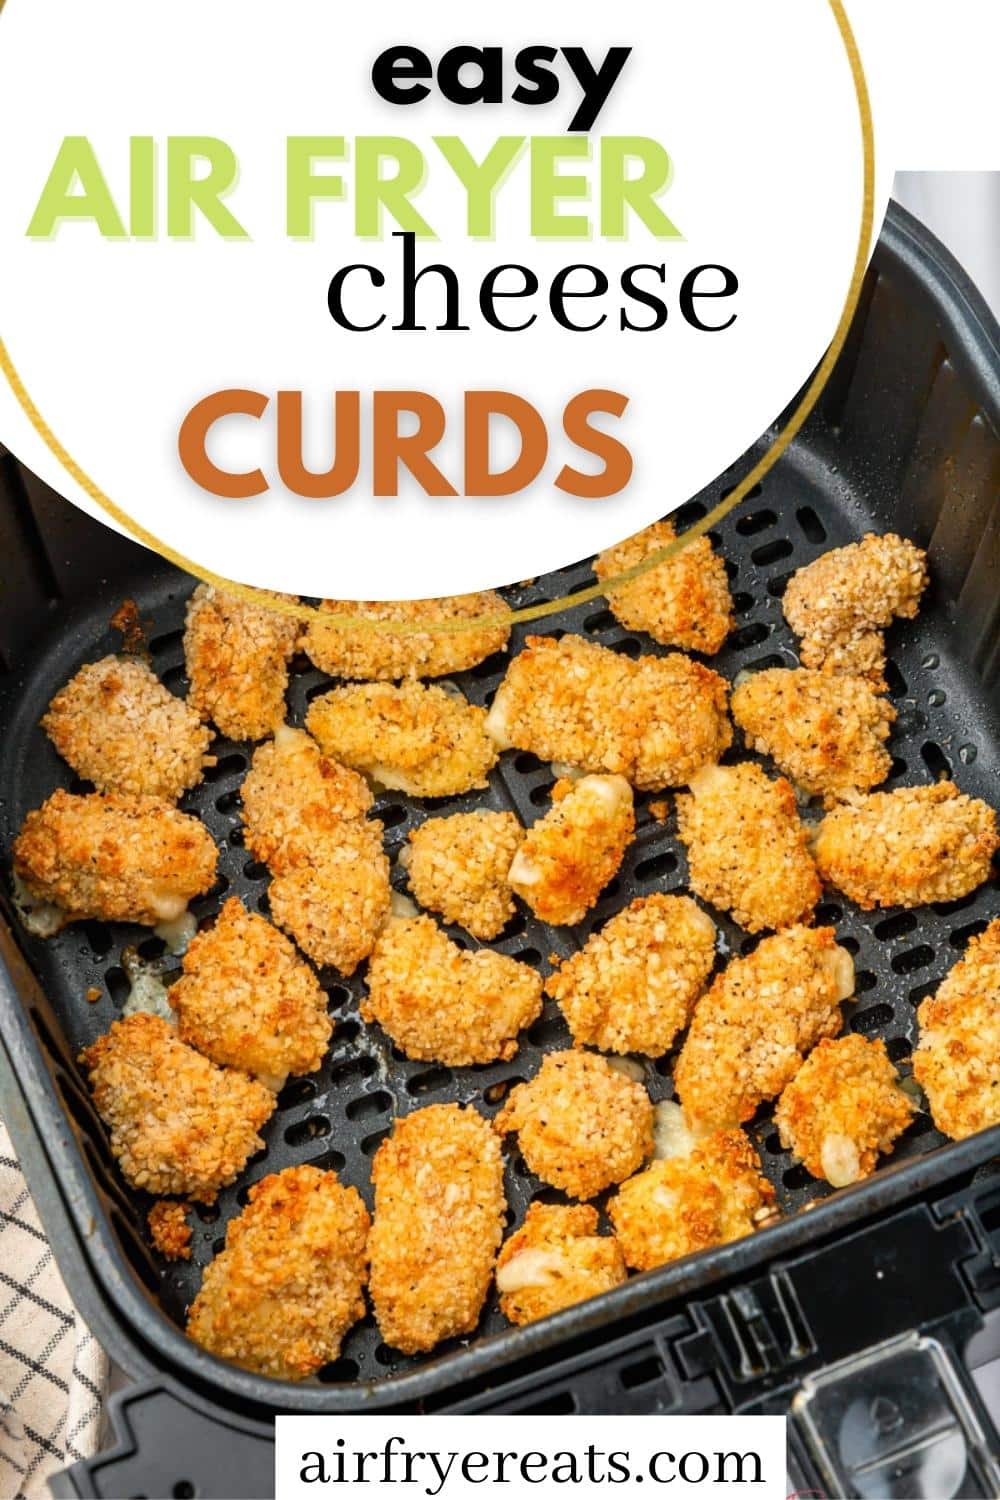 crispy fried cheese curds in a square air fryer basket. Text overlay says "easy air fryer cheese curds"